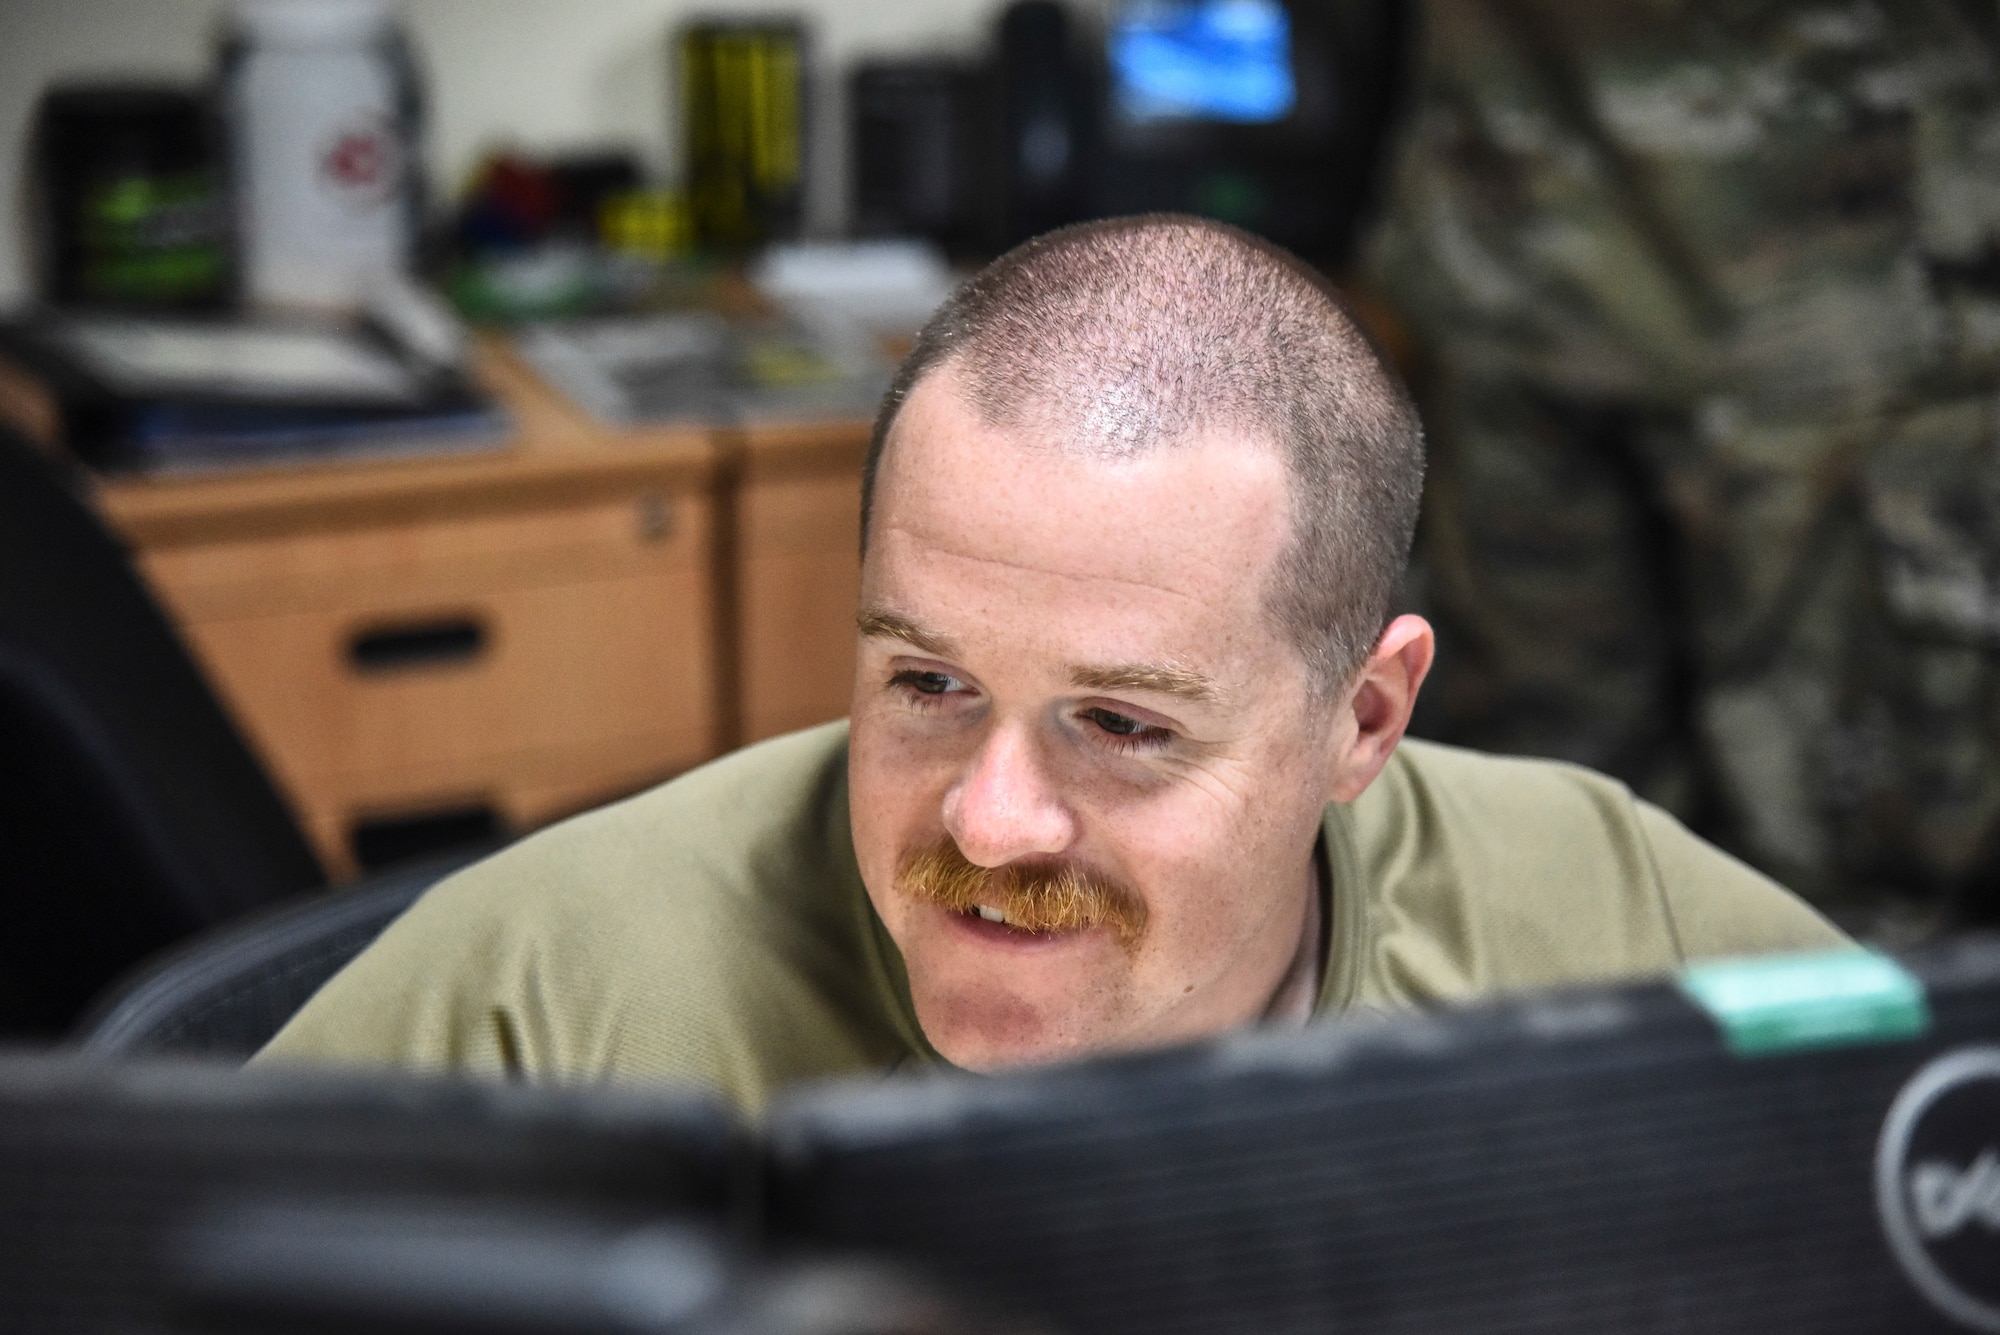 Staff Sgt. Jeremy Shiflett, 380th Expeditionary Maintenance Group KC-10 Extender quality assurance inspector, reviews a written evaluation at Al Dhafra Air Base, United Arab Emirates, March 12, 2019. QA shops consists of Airmen from different maintenance backgrounds such as crew chiefs and avionics specialists. (U.S. Air Force photo by Senior Airman Mya M. Crosby)